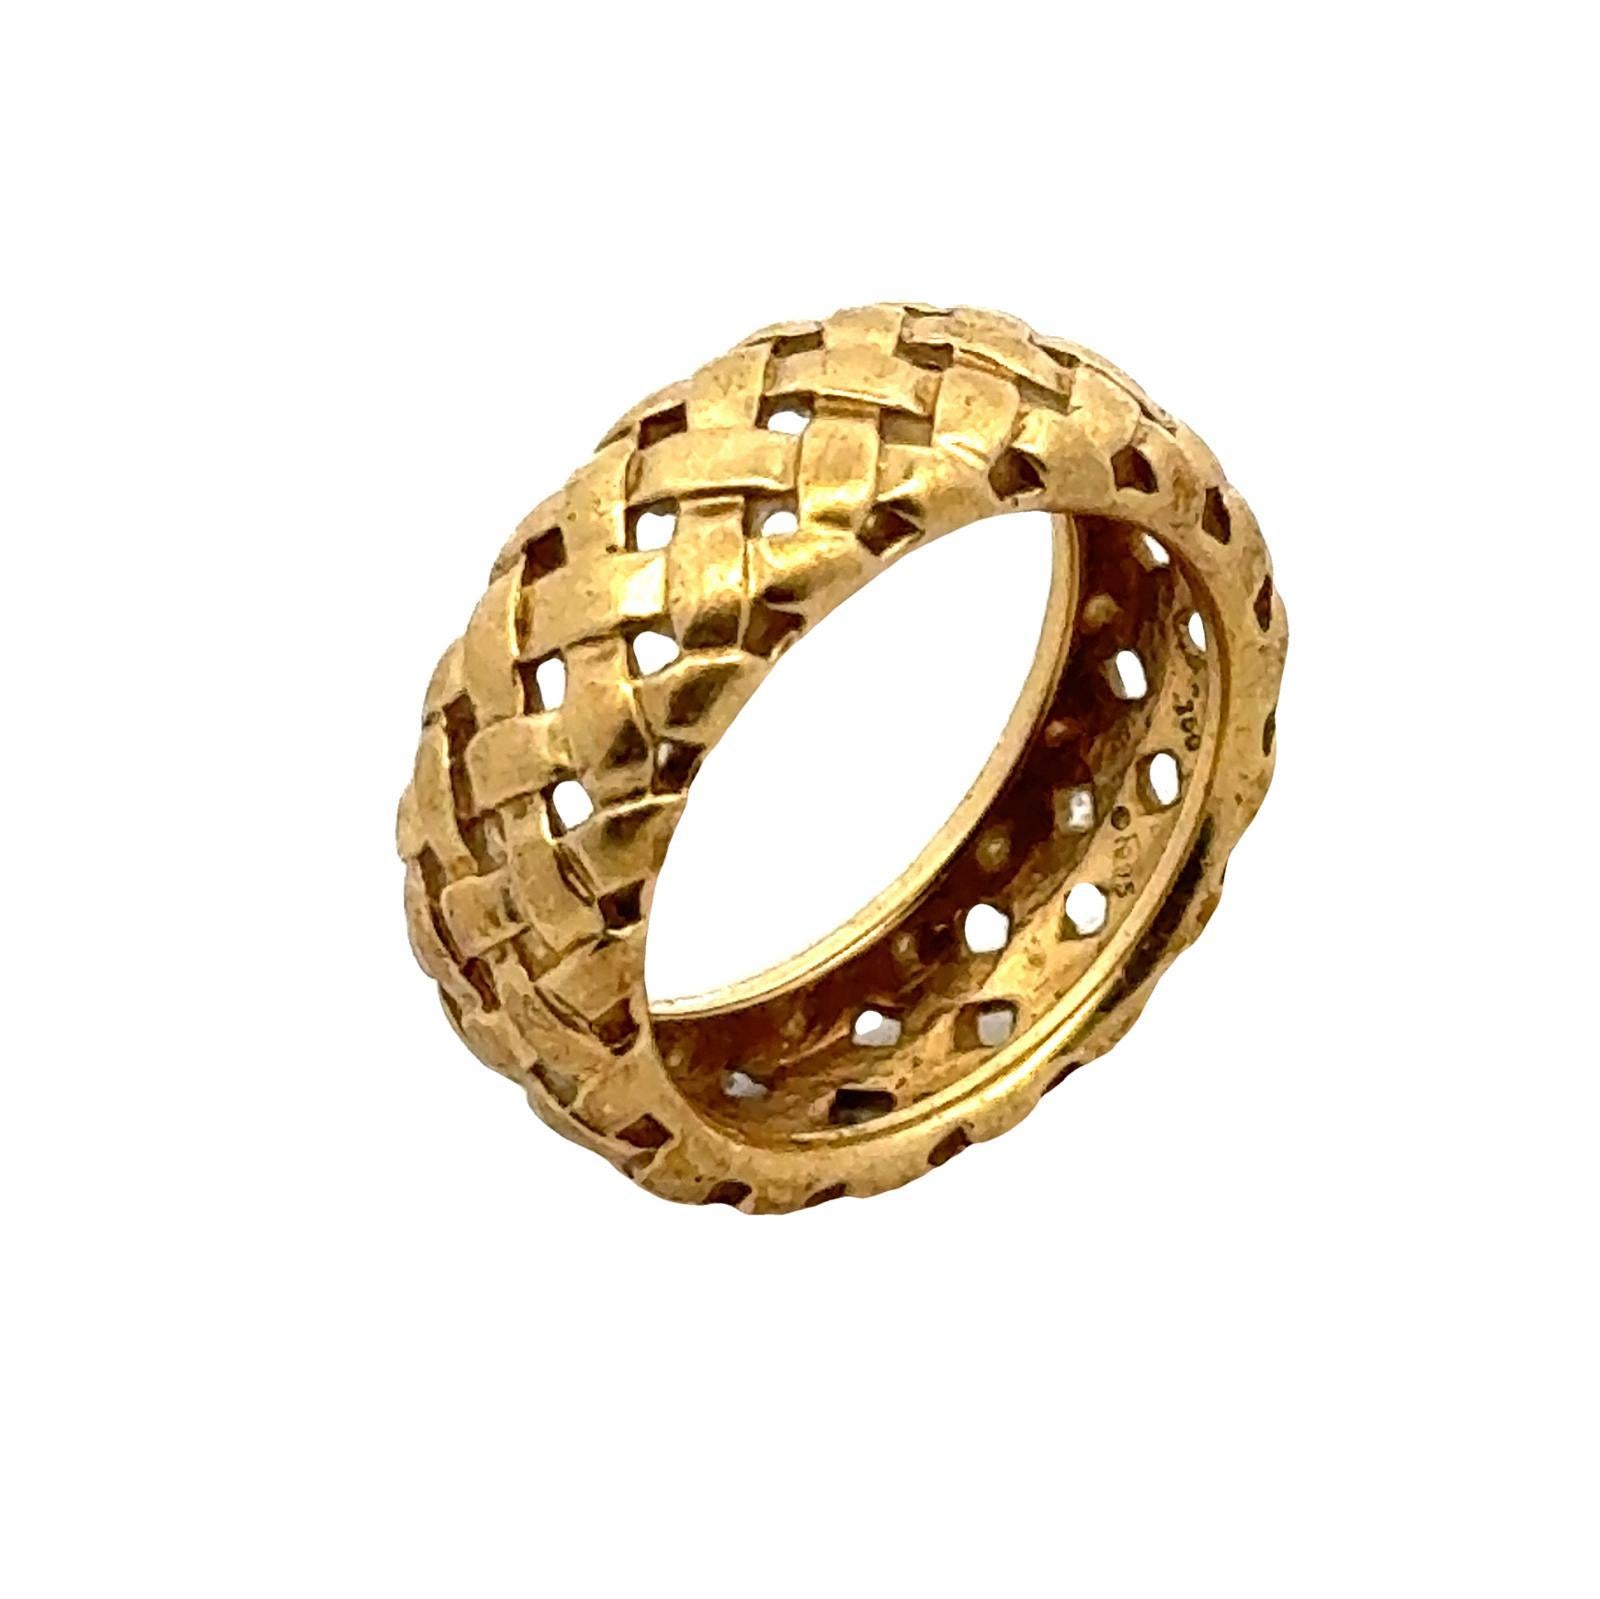 Women's 1995 Tiffany & Co. Basket Weave 18 Karat Yellow Gold Band Ring, Size 8 For Sale